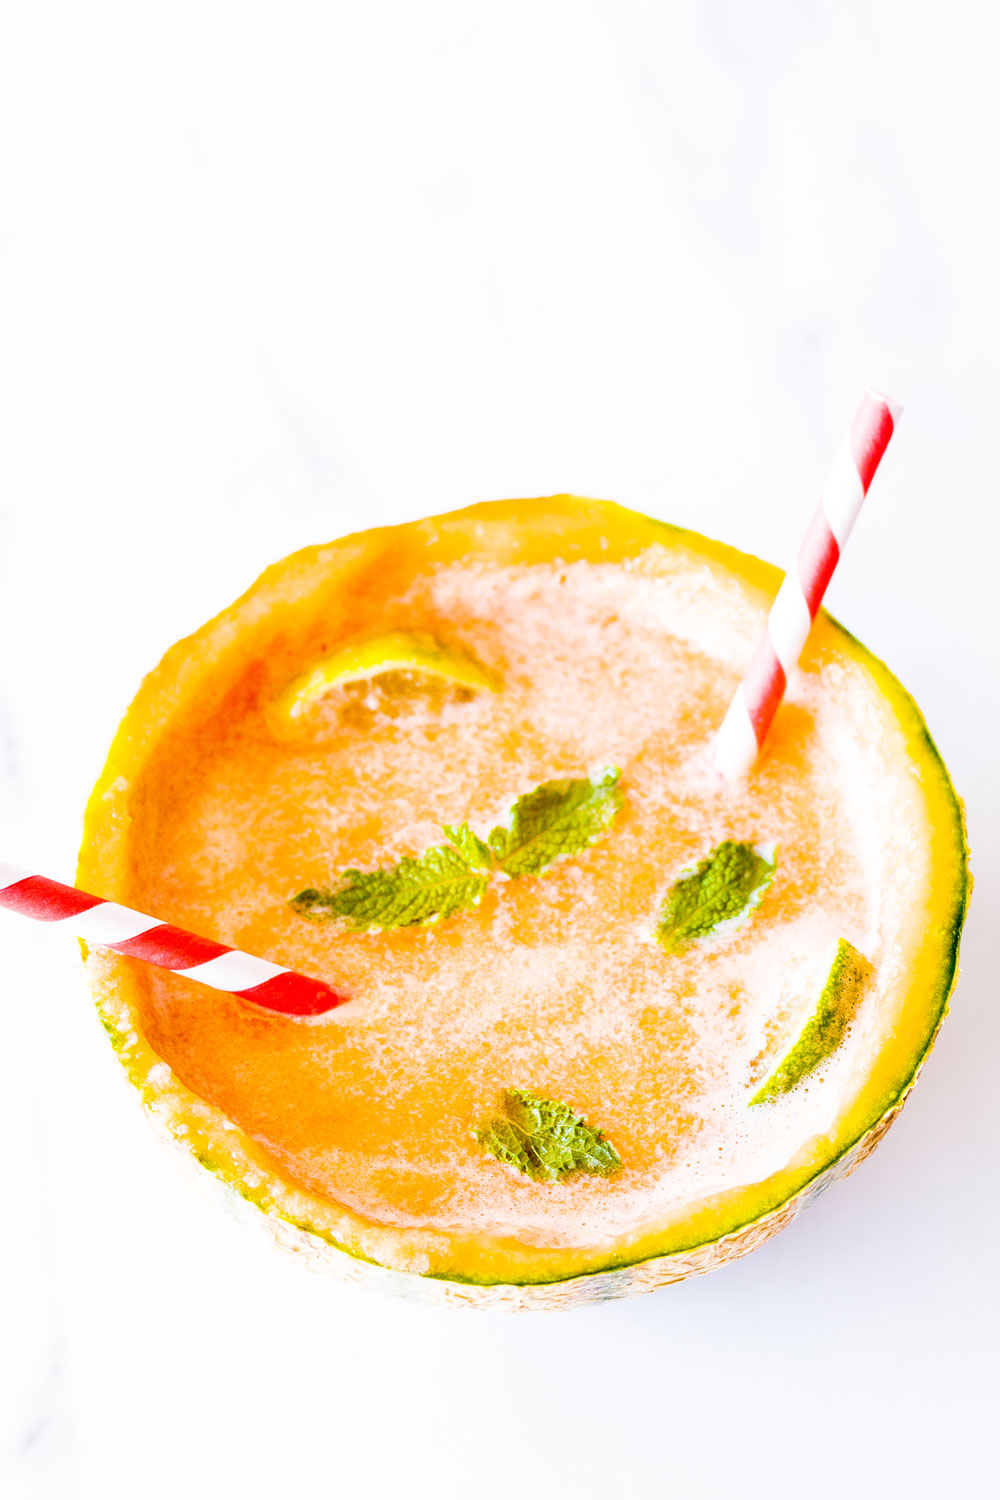 To get you in the spirit of summer, try this Citrus-Cantaloupe Mocktail Recipe, which only requires 4 ingredients and takes 5 minutes to whip up at home! https://www.spotebi.com/recipes/citrus-cantaloupe-mocktail-recipe/